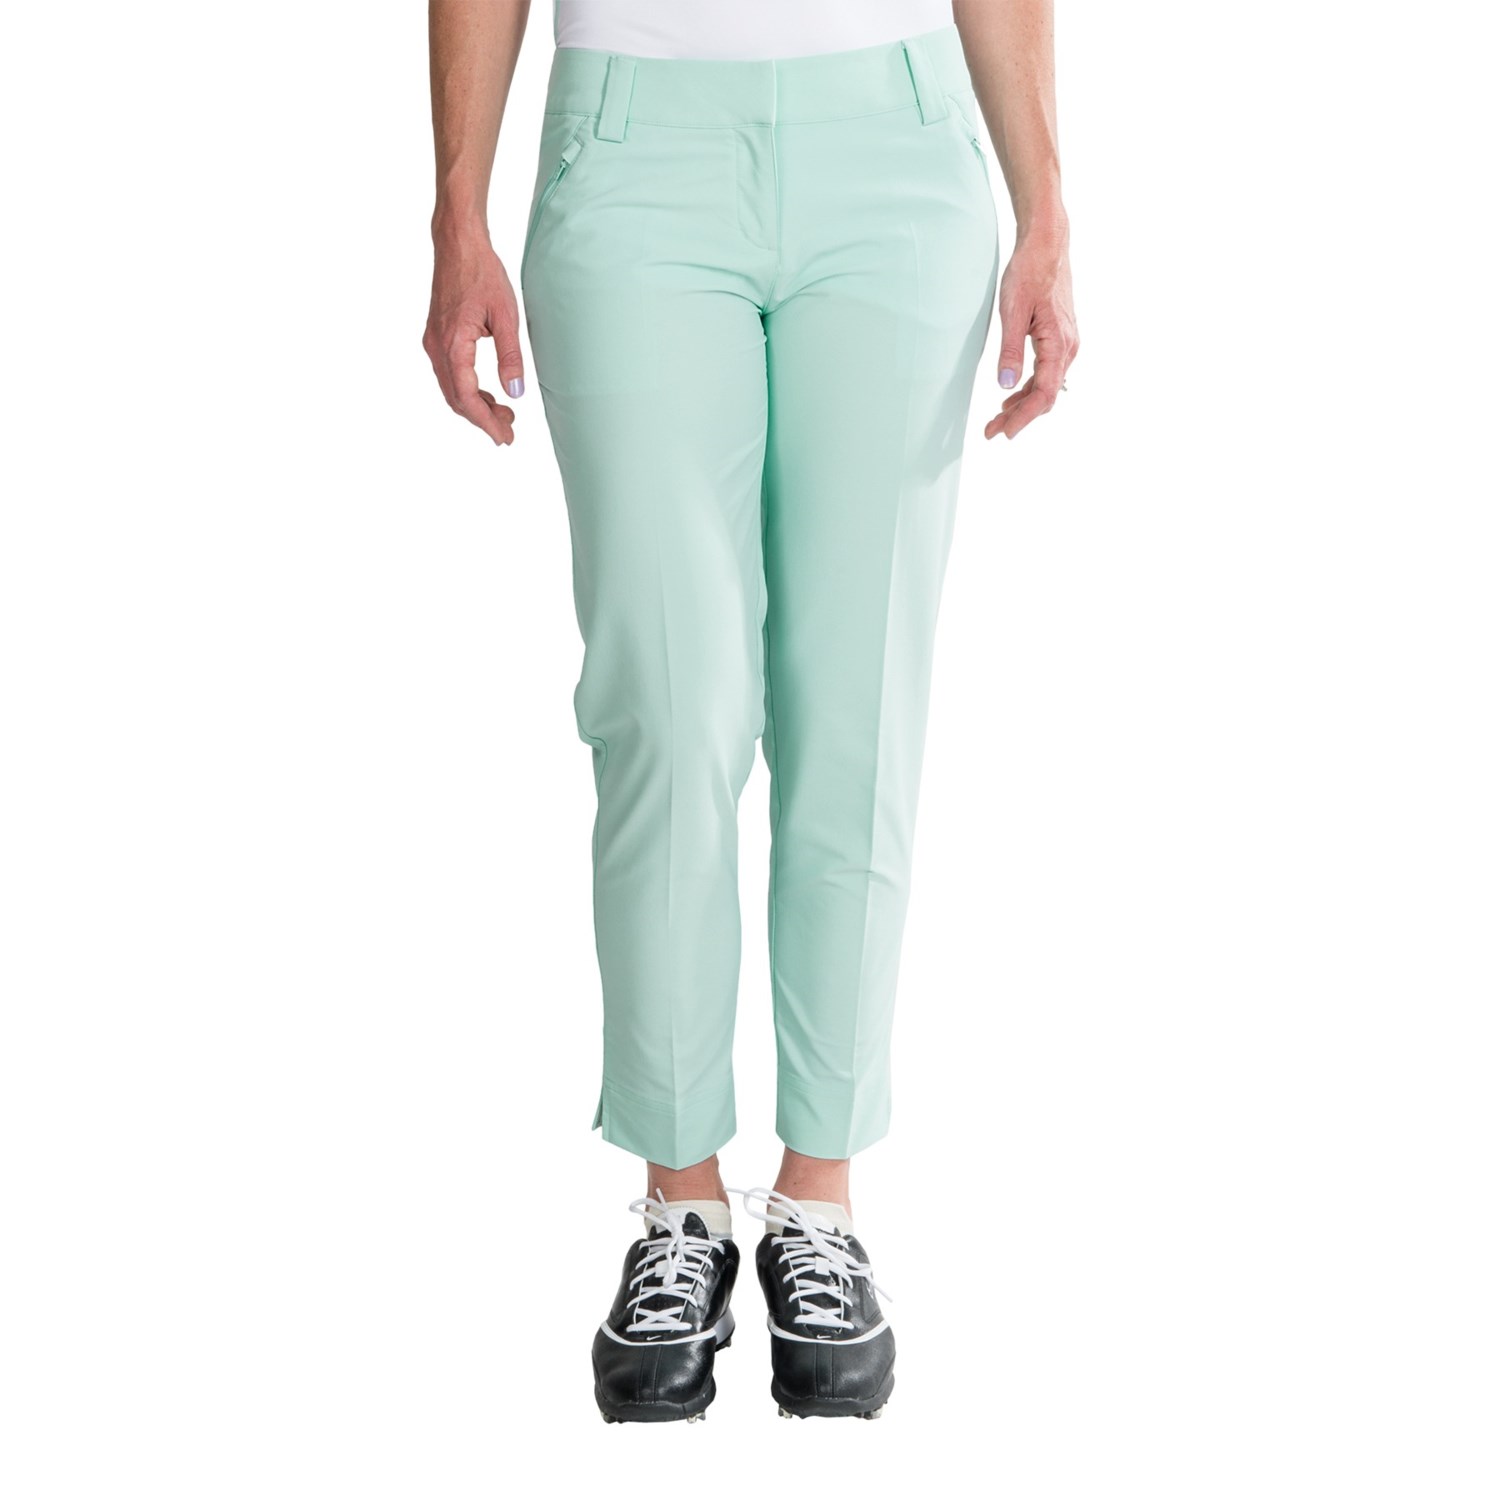 Adidas Golf Contrast Cropped Pants (For Women) 7689R - Save 80%